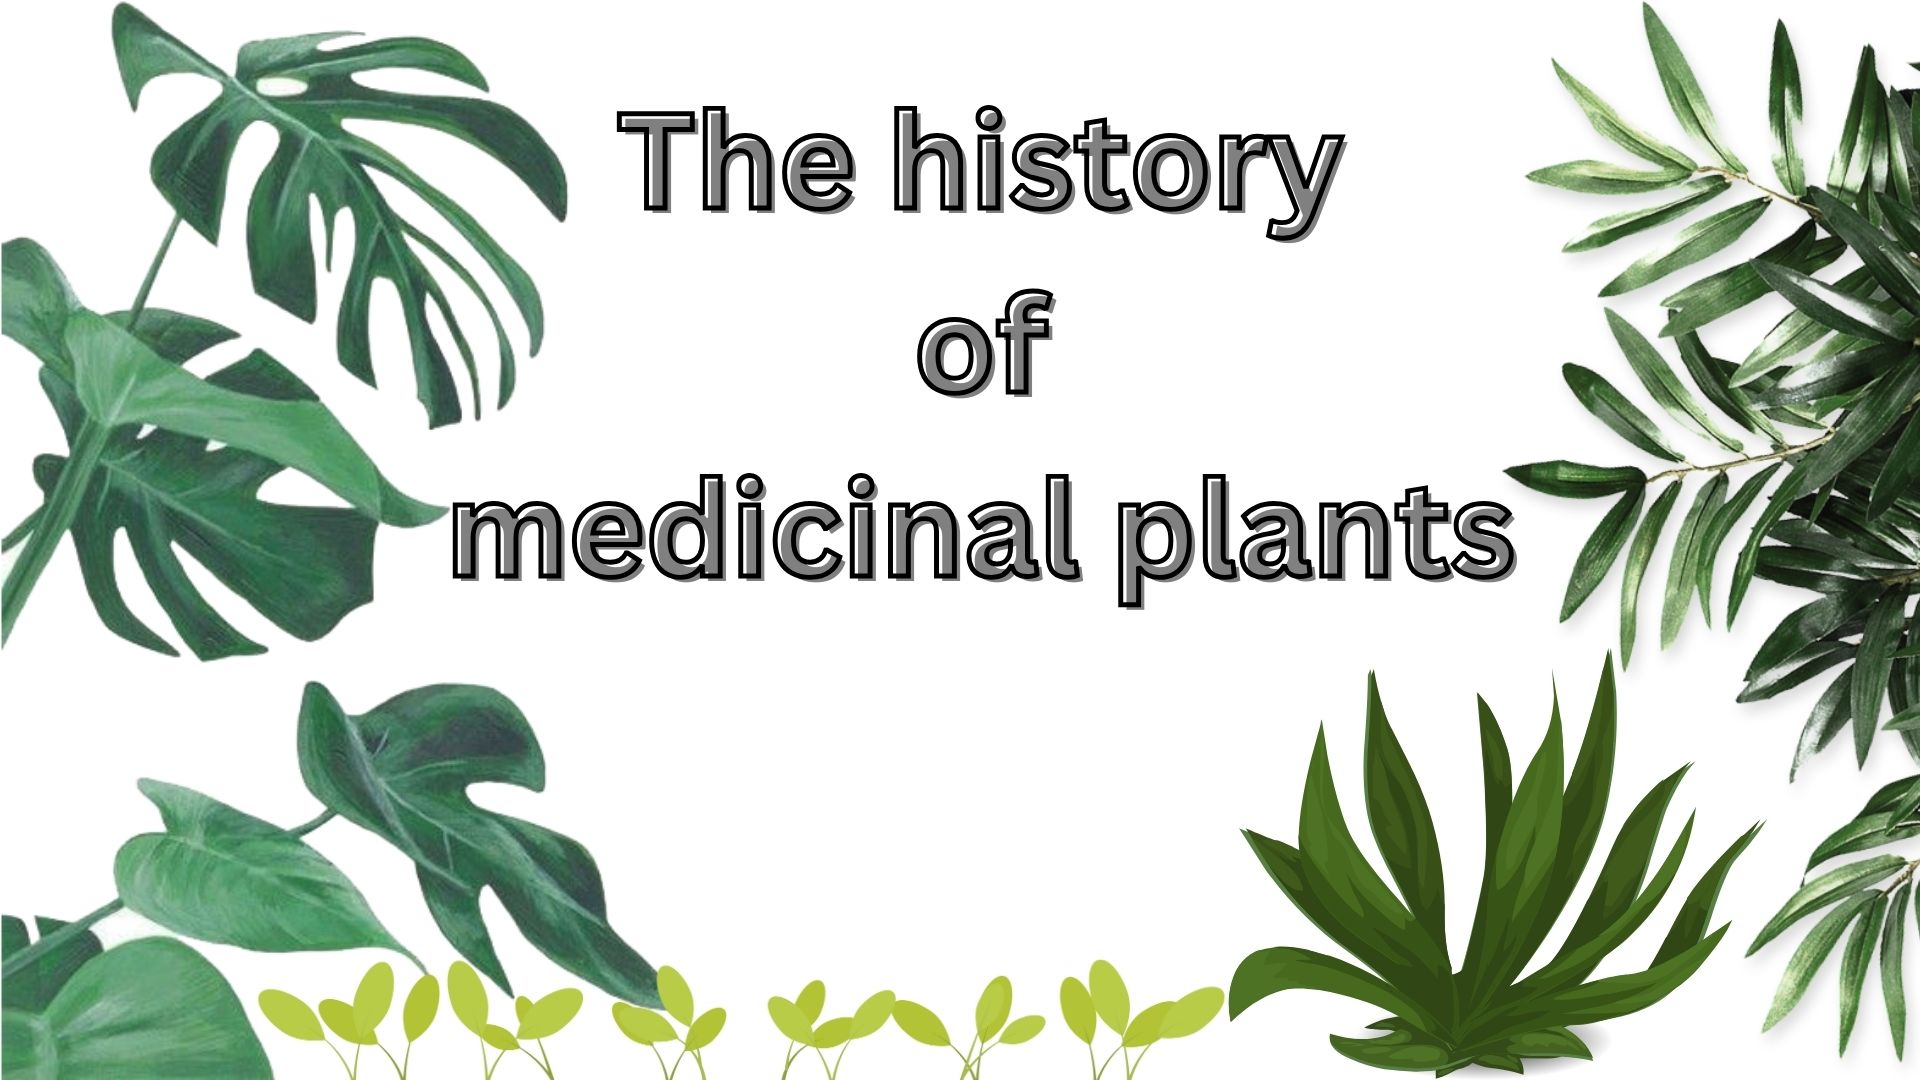 You are currently viewing The history of medicinal plants